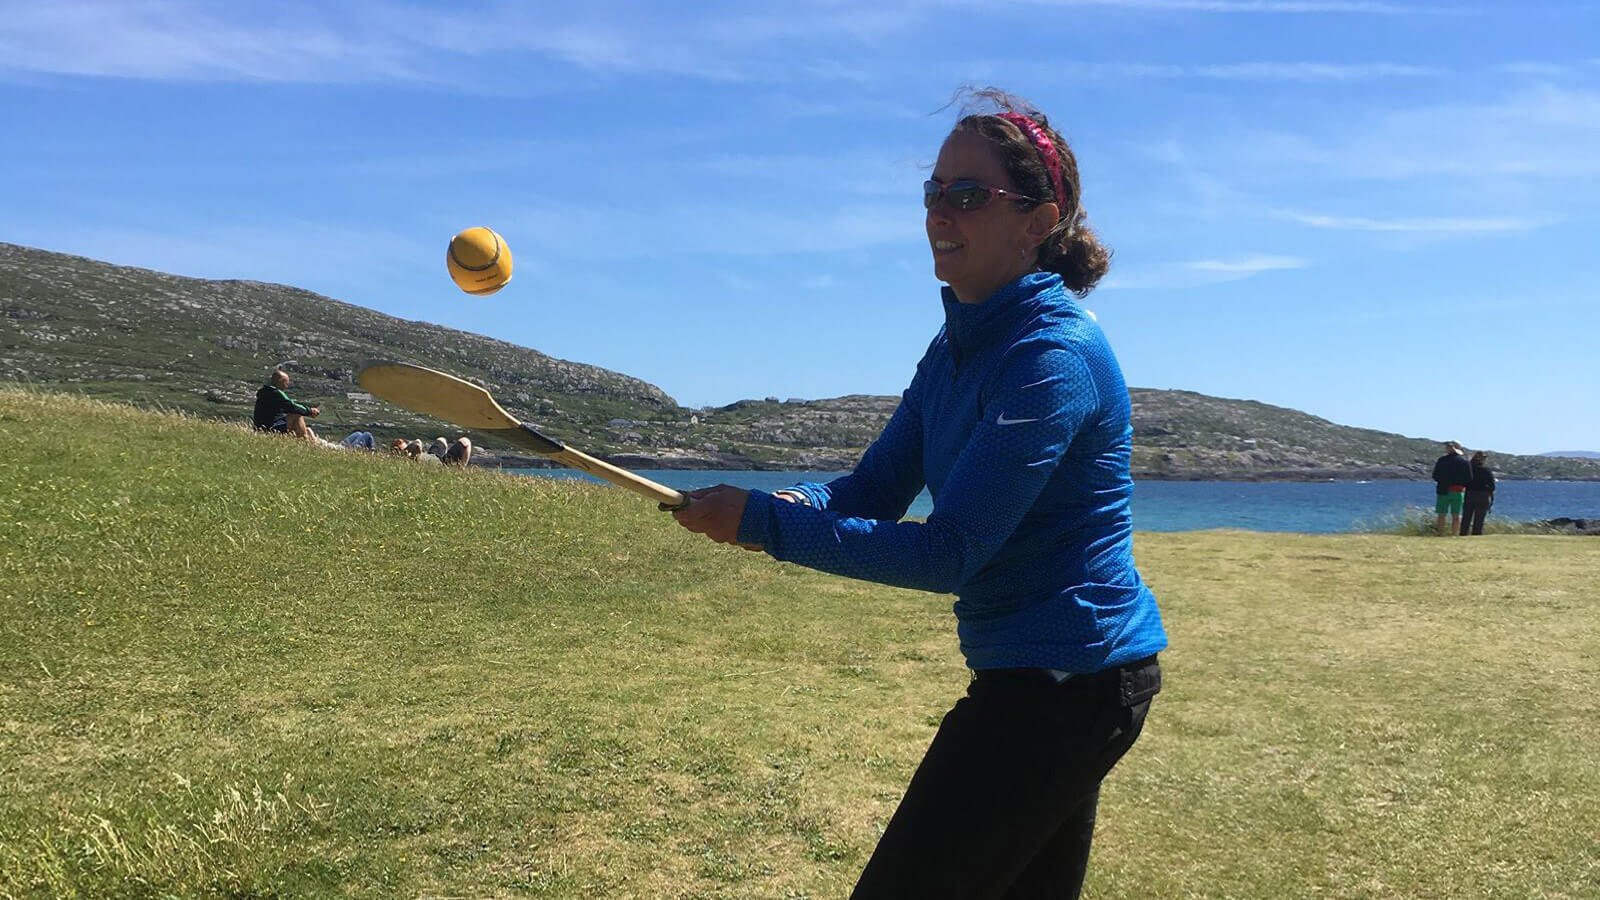 Vagabond Tours guest plays hurling in Ireland